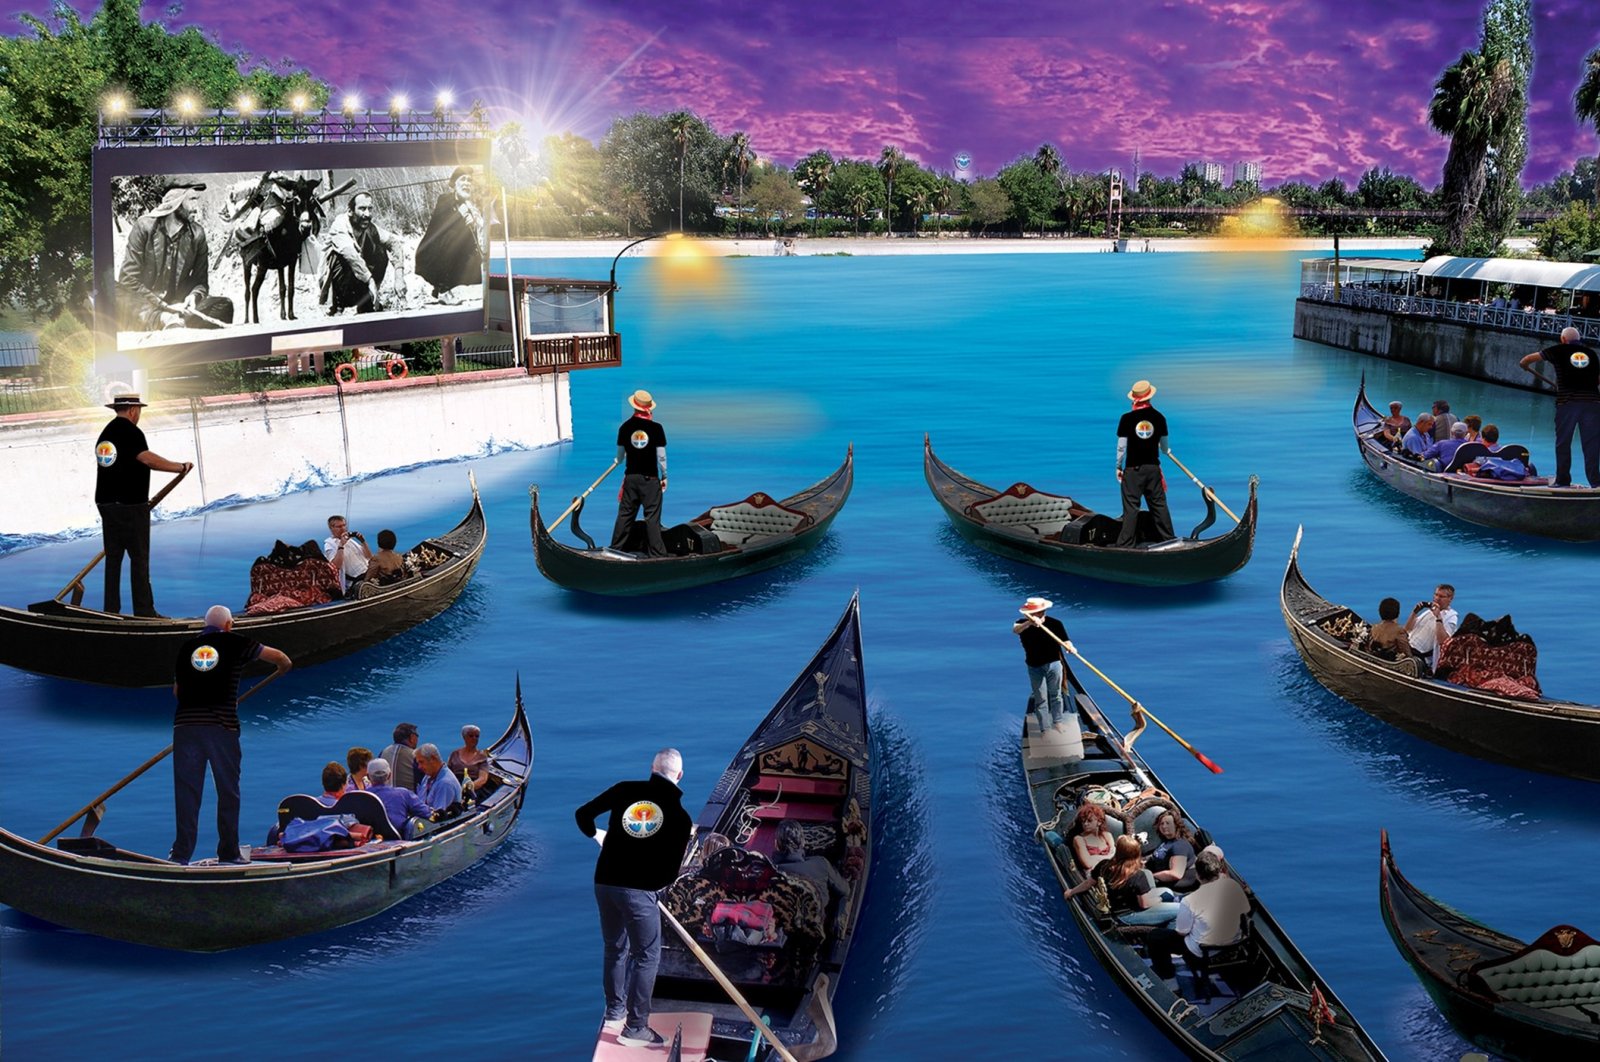 An illustration shows the gondola project being held as part of the 27th International Golden Boll Film Festival, Sept. 11, 2020. (İHA PHOTO)